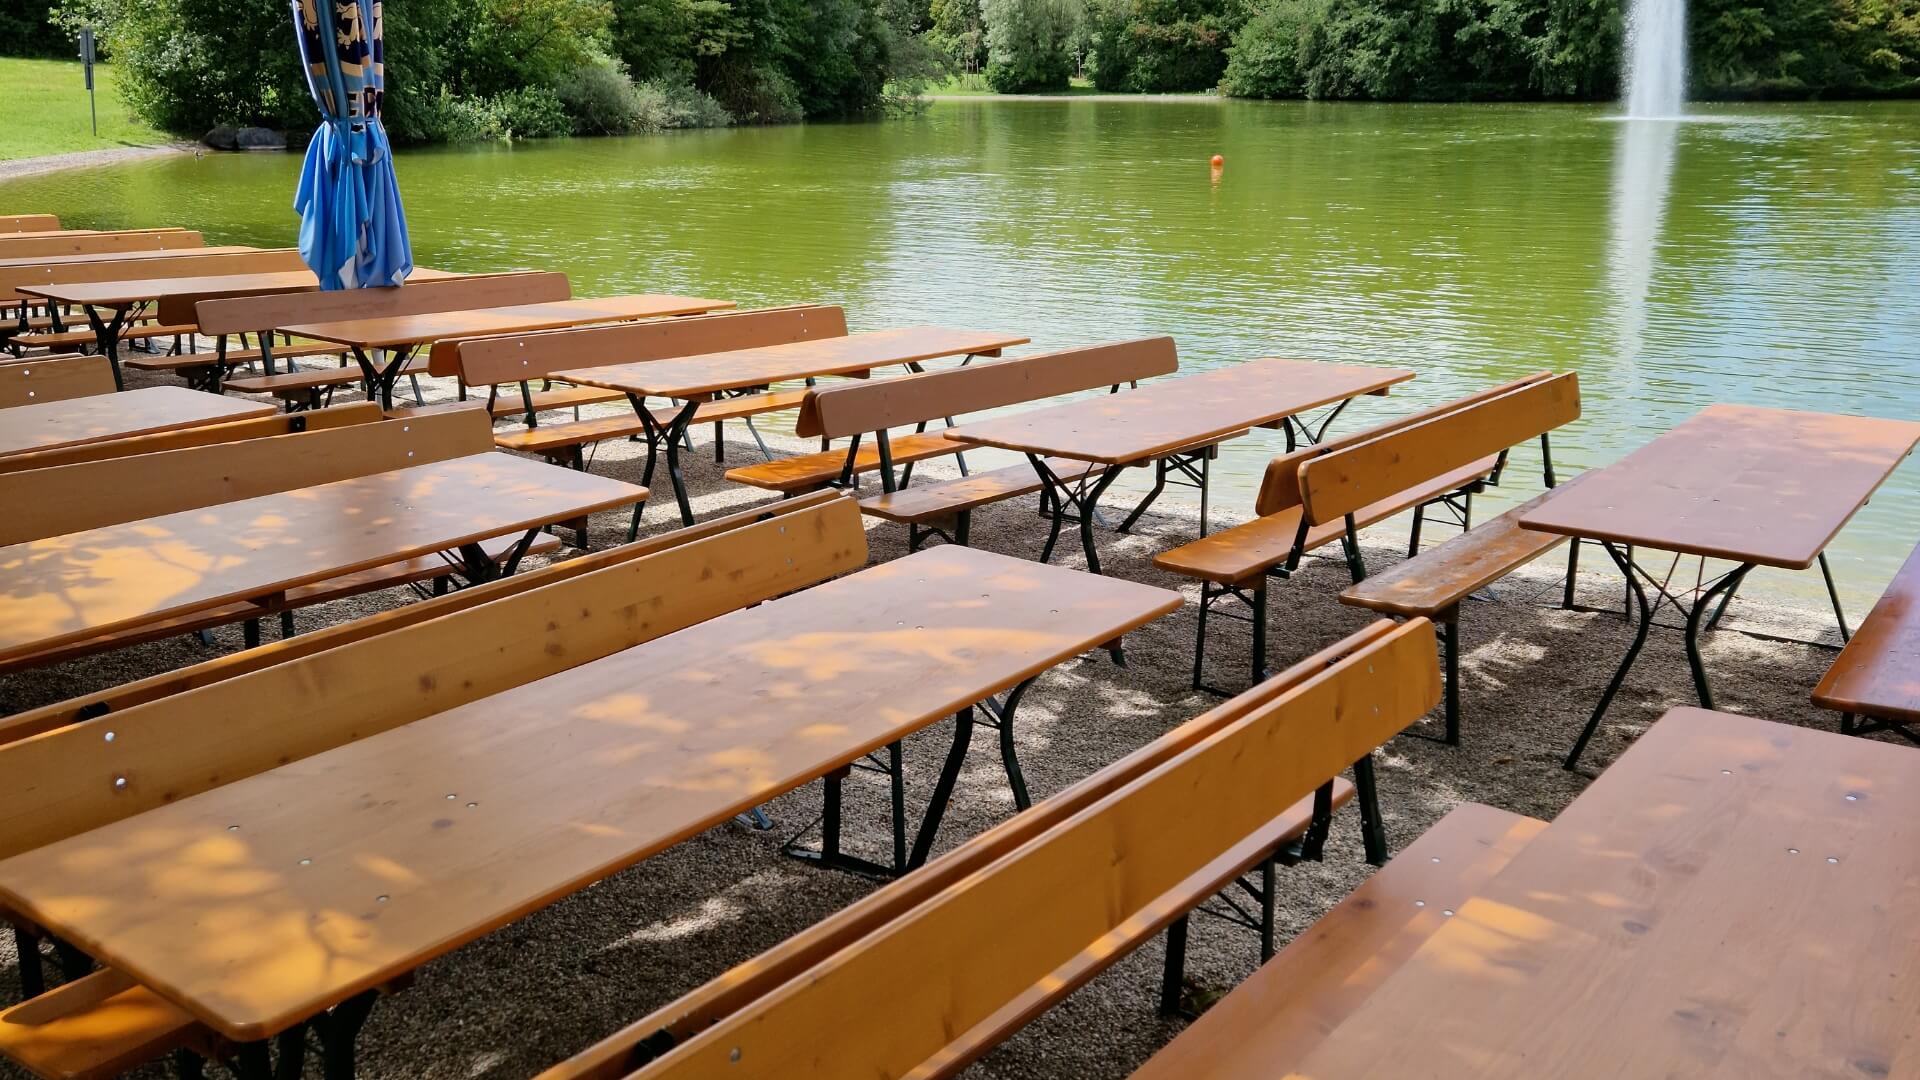 In the Michaeligarten there are a lot of beer garden table sets with legroom.